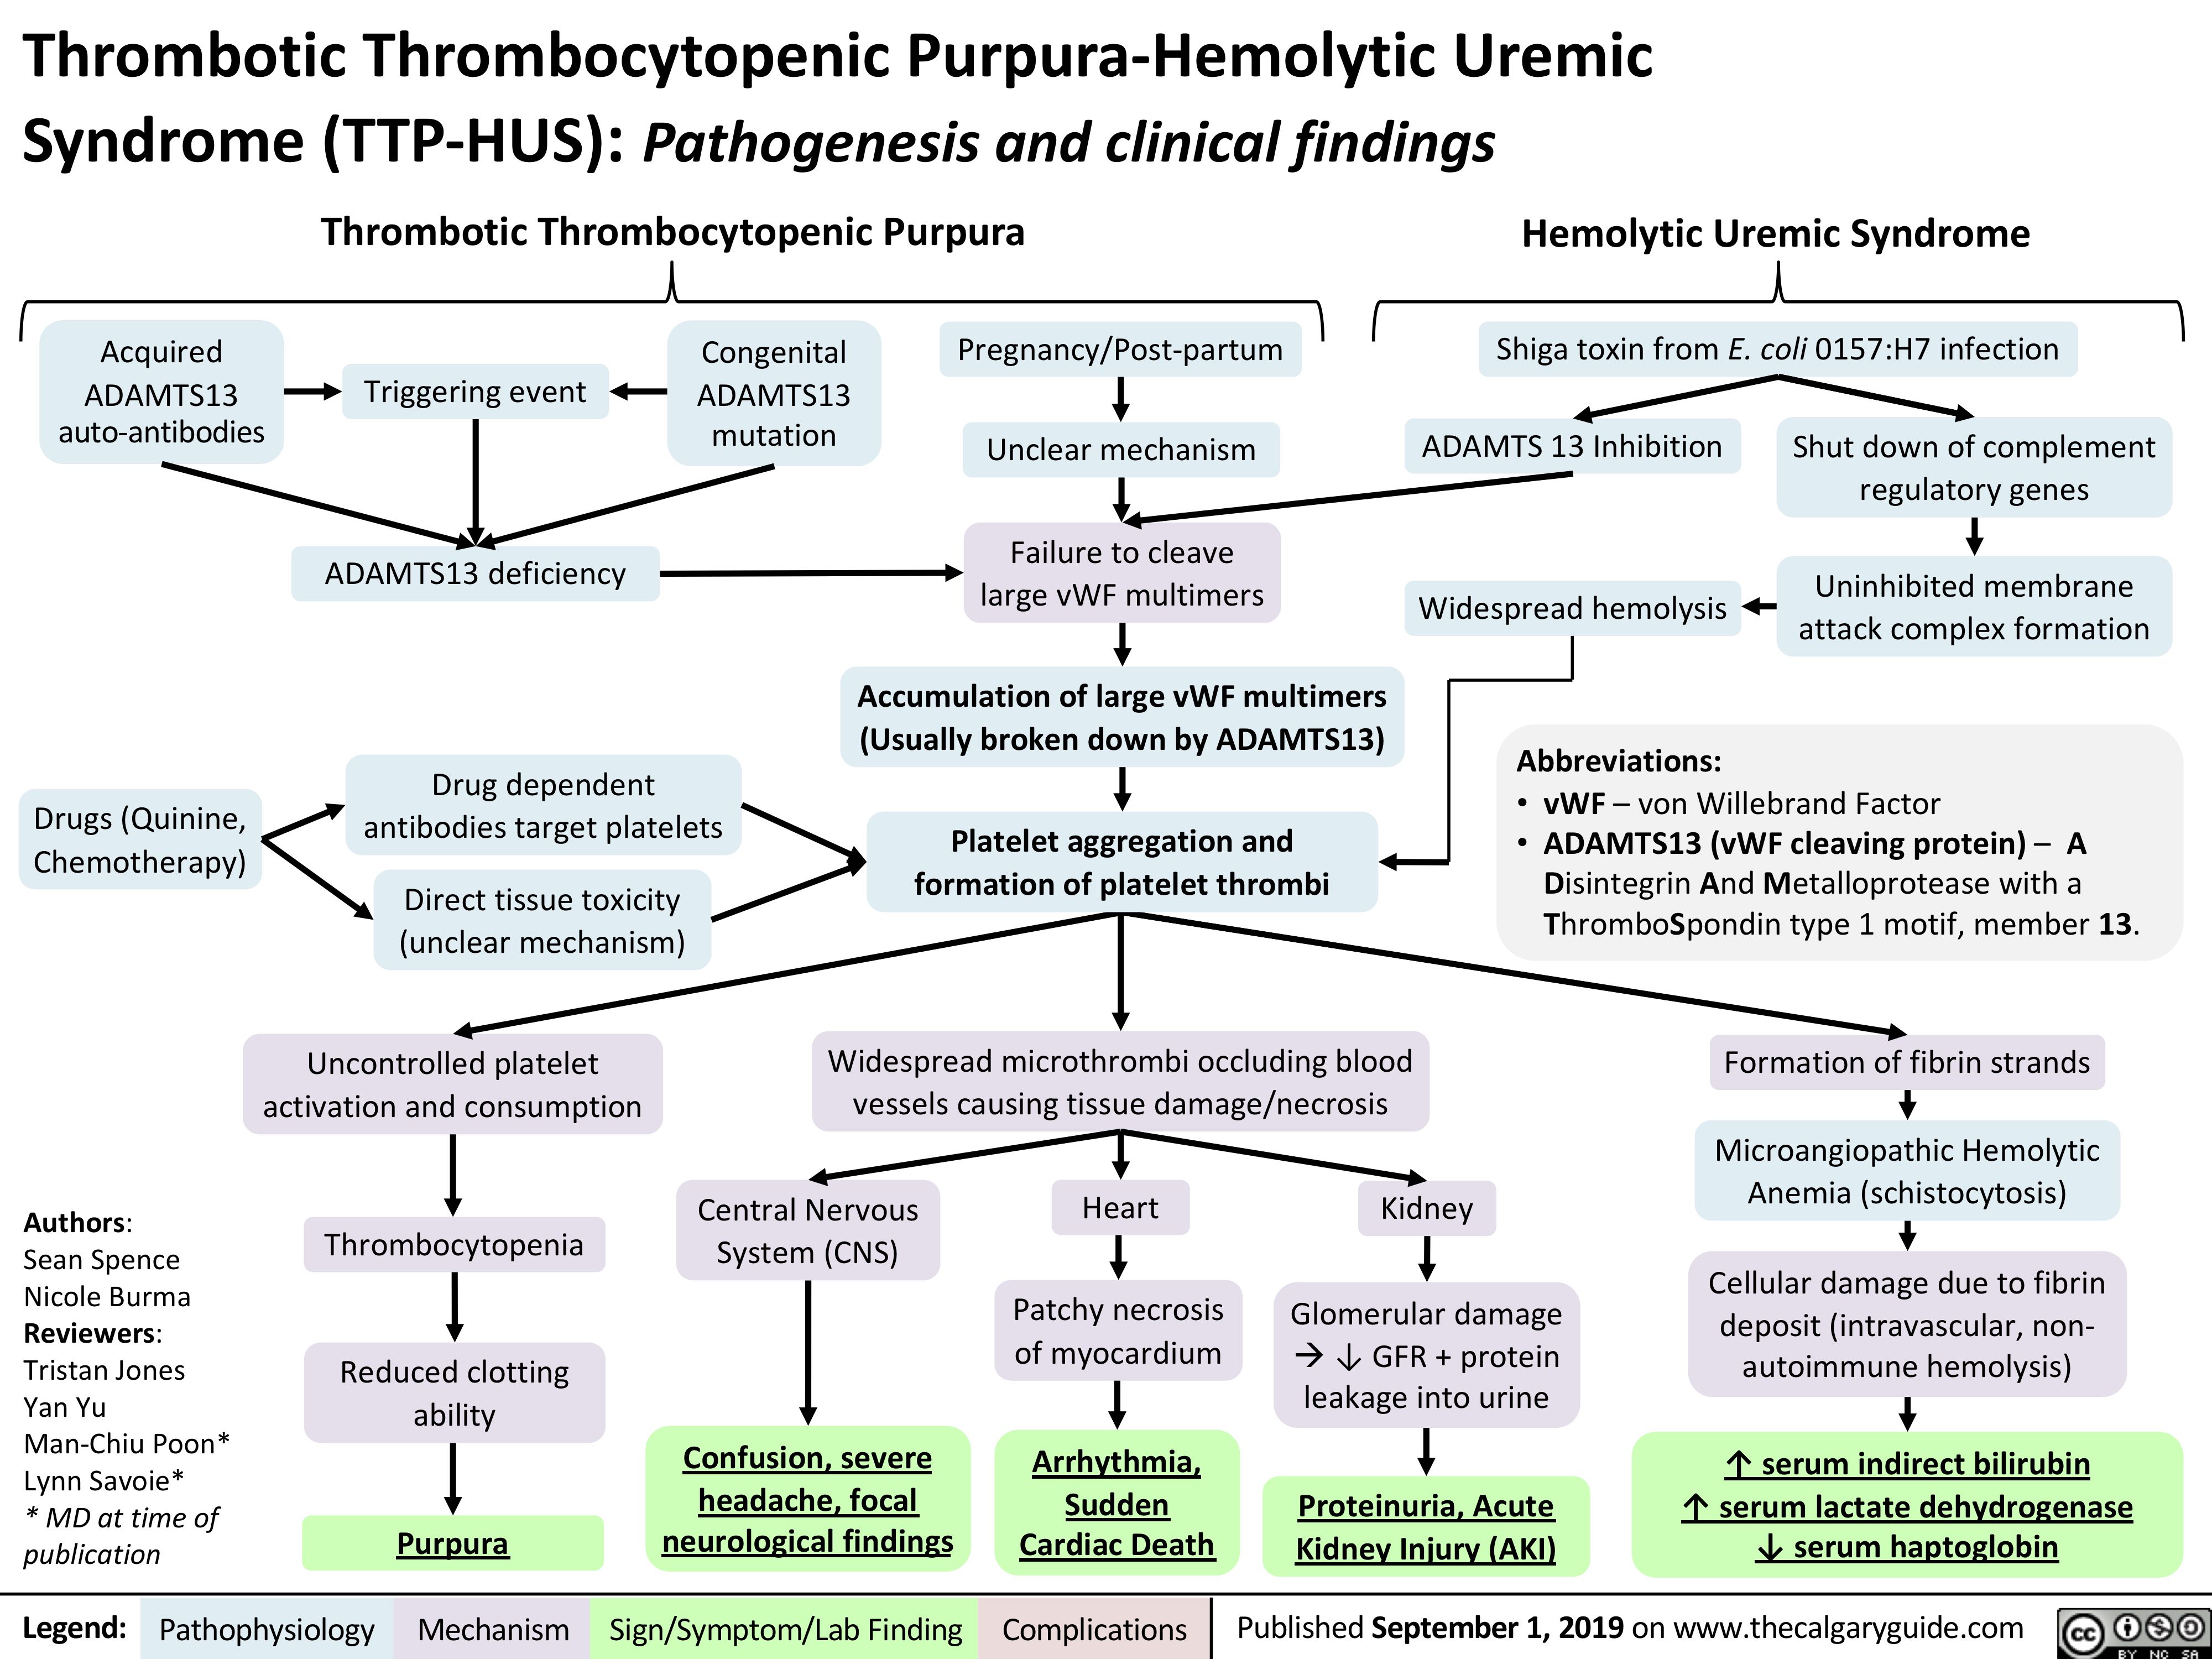 Thrombotic Thrombocytopenic Purpura-Hemolytic Uremic Syndrome (TTP-HUS): Pathogenesis and clinical findings
Thrombotic Thrombocytopenic Purpura
Hemolytic Uremic Syndrome
Shiga toxin from E. coli 0157:H7 infection
      Acquired
ADAMTS13 auto-antibodies
Pregnancy/Post-partum Unclear mechanism
Failure to cleave large vWF multimers
Accumulation of large vWF multimers (Usually broken down by ADAMTS13)
Platelet aggregation and formation of platelet thrombi
Widespread microthrombi occluding blood vessels causing tissue damage/necrosis
Congenital ADAMTS13 mutation
 Triggering event
ADAMTS13 deficiency
Drug dependent antibodies target platelets
Direct tissue toxicity (unclear mechanism)
ADAMTS 13 Inhibition Widespread hemolysis
Shut down of complement regulatory genes
Uninhibited membrane attack complex formation
                            Drugs (Quinine, Chemotherapy)
Abbreviations:
• vWF – von Willebrand Factor
• ADAMTS13 (vWF cleaving protein) – A
Disintegrin And Metalloprotease with a ThromboSpondin type 1 motif, member 13.
Formation of fibrin strands
Microangiopathic Hemolytic Anemia (schistocytosis)
Cellular damage due to fibrin deposit (intravascular, non- autoimmune hemolysis)
↑ serum indirect bilirubin
↑ serum lactate dehydrogenase ↓ serum haptoglobin
                 Authors:
Sean Spence Nicole Burma Reviewers: Tristan Jones Yan Yu Man-Chiu Poon* Lynn Savoie*
* MD at time of publication
Uncontrolled platelet activation and consumption
Thrombocytopenia
Reduced clotting ability
Purpura
Central Nervous System (CNS)
Confusion, severe headache, focal neurological findings
Heart
Patchy necrosis of myocardium
Arrhythmia, Sudden Cardiac Death
Kidney
Glomerular damage à↓ GFR + protein leakage into urine
Proteinuria, Acute Kidney Injury (AKI)
                              Legend:
 Pathophysiology
 Mechanism
Sign/Symptom/Lab Finding
  Complications
Published September 1, 2019 on www.thecalgaryguide.com
   